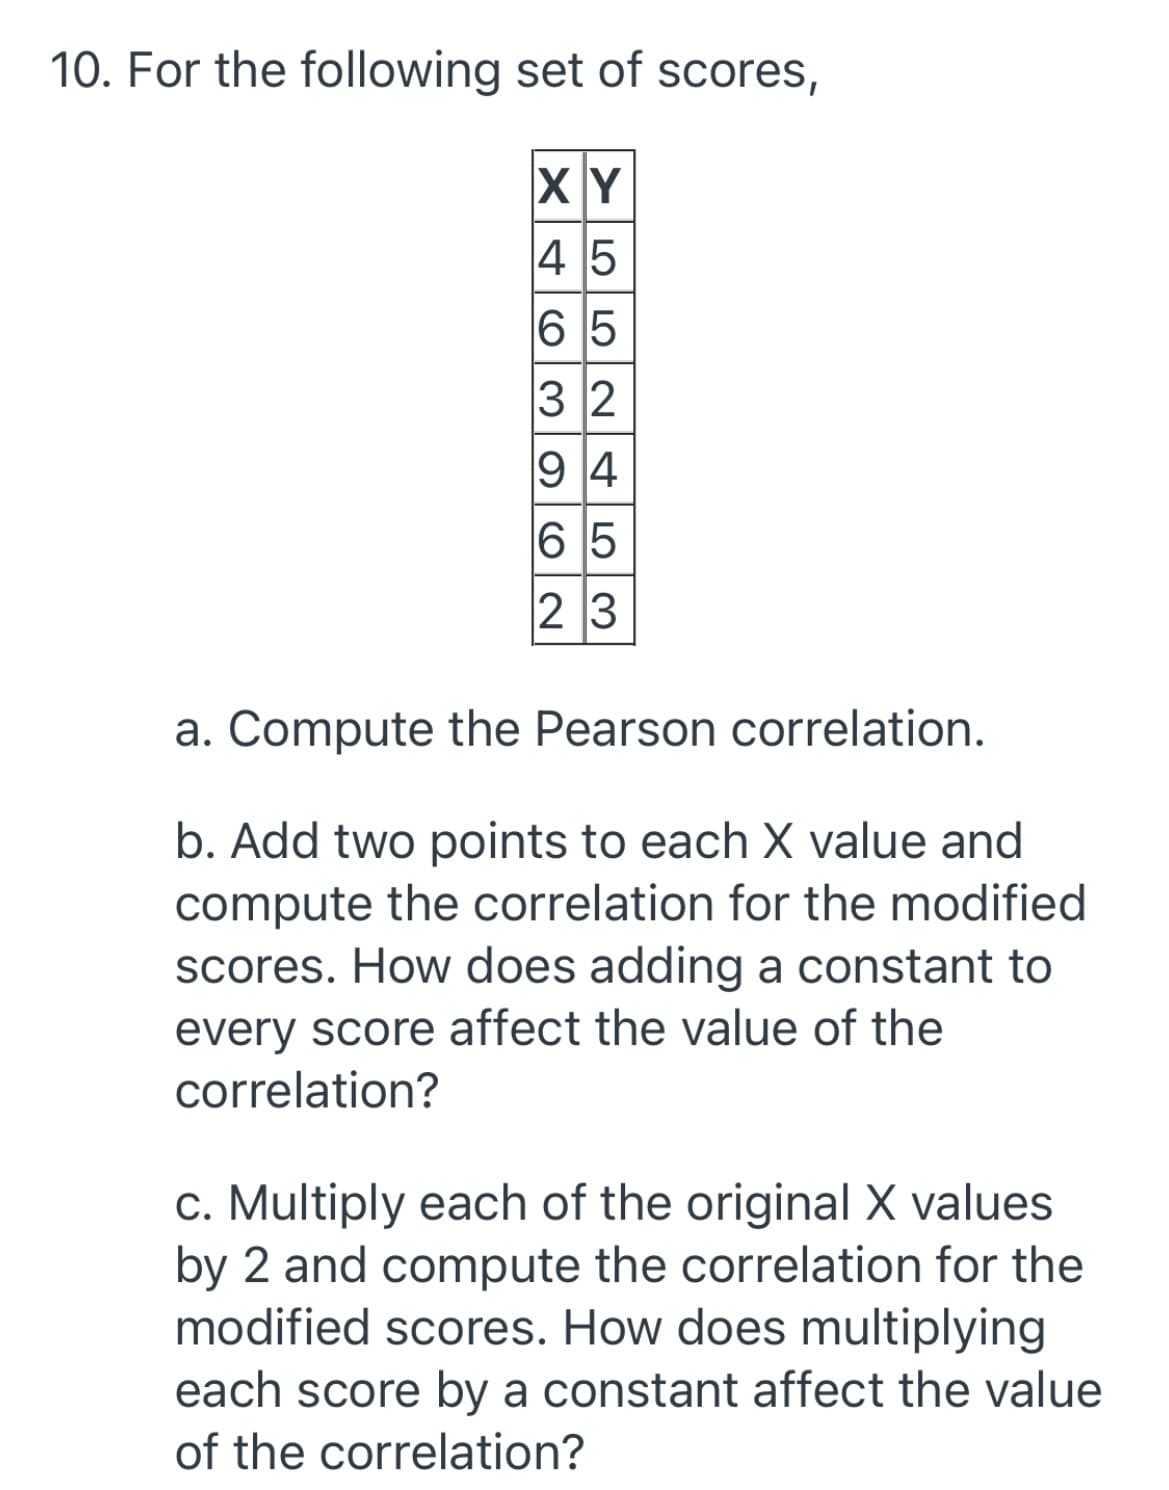 10. For the following set of scores,
XY
4 5
6 5
3 2
9 4
6 5
2 3
a. Compute the Pearson correlation.
b. Add two points to each X value and
compute the correlation for the modified
scores. How does adding a constant to
every score affect the value of the
correlation?
c. Multiply each of the original X values
by 2 and compute the correlation for the
modified scores. How does multiplying
each score by a constant affect the value
of the correlation?
